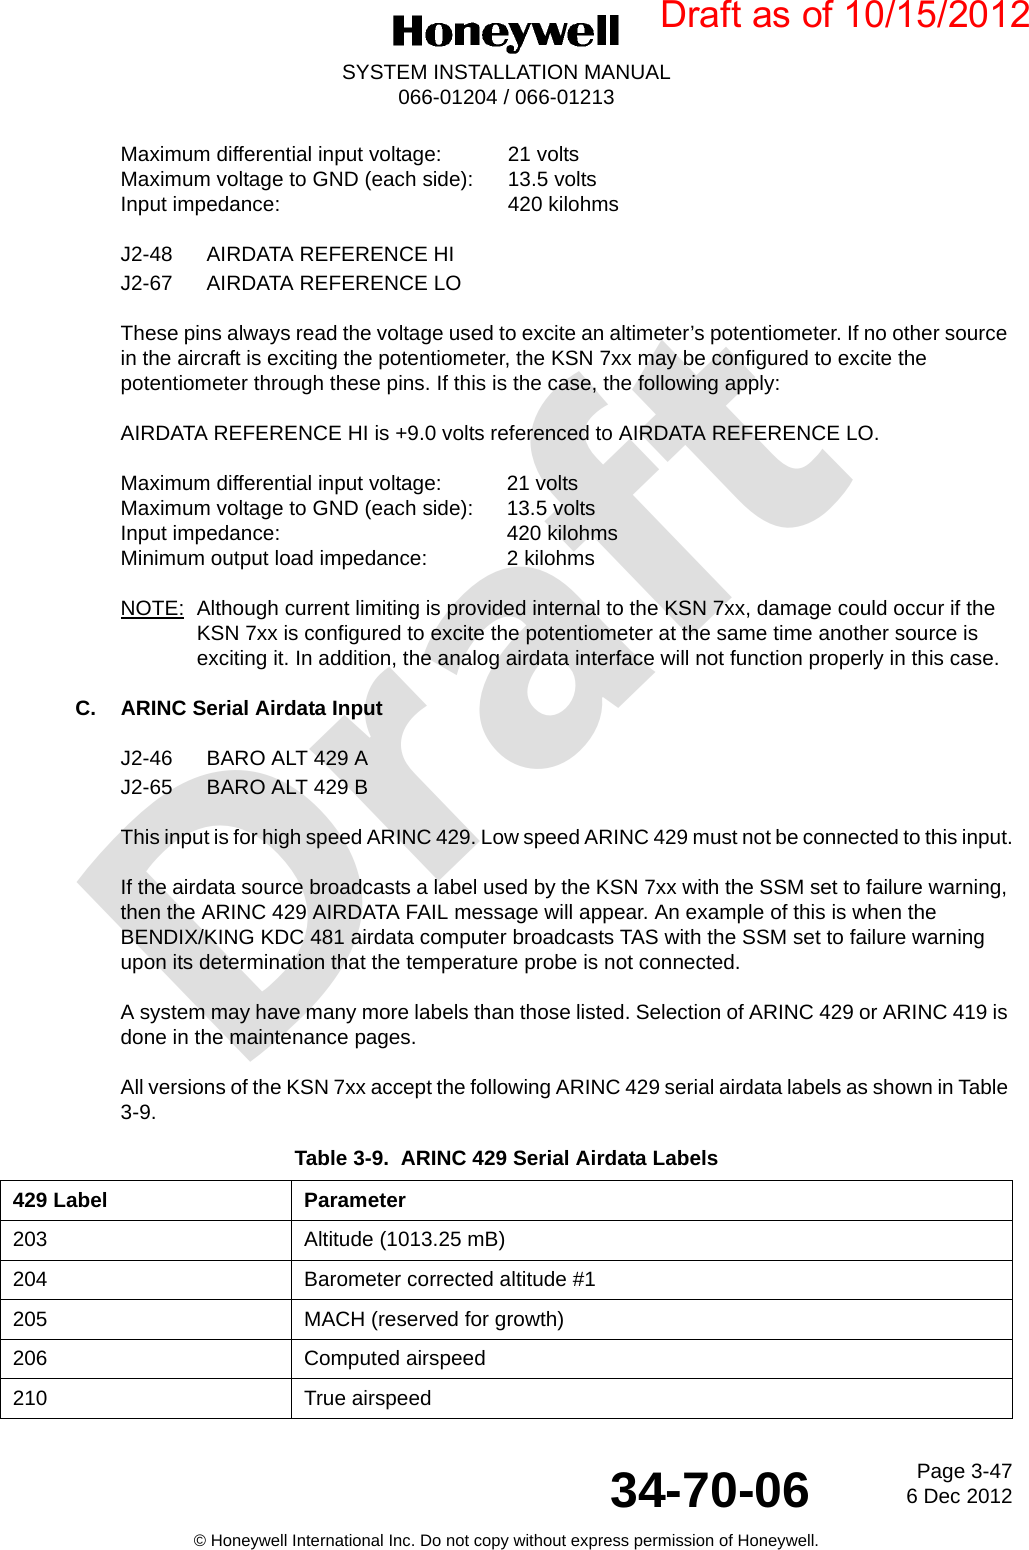 DraftPage 3-476 Dec 201234-70-06SYSTEM INSTALLATION MANUAL066-01204 / 066-01213© Honeywell International Inc. Do not copy without express permission of Honeywell.Maximum differential input voltage:  21 voltsMaximum voltage to GND (each side):  13.5 voltsInput impedance:  420 kilohmsJ2-48 AIRDATA REFERENCE HIJ2-67 AIRDATA REFERENCE LOThese pins always read the voltage used to excite an altimeter’s potentiometer. If no other source in the aircraft is exciting the potentiometer, the KSN 7xx may be configured to excite the potentiometer through these pins. If this is the case, the following apply:AIRDATA REFERENCE HI is +9.0 volts referenced to AIRDATA REFERENCE LO.Maximum differential input voltage:  21 voltsMaximum voltage to GND (each side):  13.5 voltsInput impedance:  420 kilohmsMinimum output load impedance:  2 kilohmsNOTE: Although current limiting is provided internal to the KSN 7xx, damage could occur if the KSN 7xx is configured to excite the potentiometer at the same time another source is exciting it. In addition, the analog airdata interface will not function properly in this case.C. ARINC Serial Airdata InputJ2-46 BARO ALT 429 AJ2-65 BARO ALT 429 BThis input is for high speed ARINC 429. Low speed ARINC 429 must not be connected to this input.If the airdata source broadcasts a label used by the KSN 7xx with the SSM set to failure warning, then the ARINC 429 AIRDATA FAIL message will appear. An example of this is when the BENDIX/KING KDC 481 airdata computer broadcasts TAS with the SSM set to failure warning upon its determination that the temperature probe is not connected.A system may have many more labels than those listed. Selection of ARINC 429 or ARINC 419 is done in the maintenance pages.All versions of the KSN 7xx accept the following ARINC 429 serial airdata labels as shown in Table 3-9.Table 3-9.  ARINC 429 Serial Airdata Labels429 Label Parameter203 Altitude (1013.25 mB)204 Barometer corrected altitude #1205 MACH (reserved for growth)206 Computed airspeed210 True airspeedDraft as of 10/15/2012